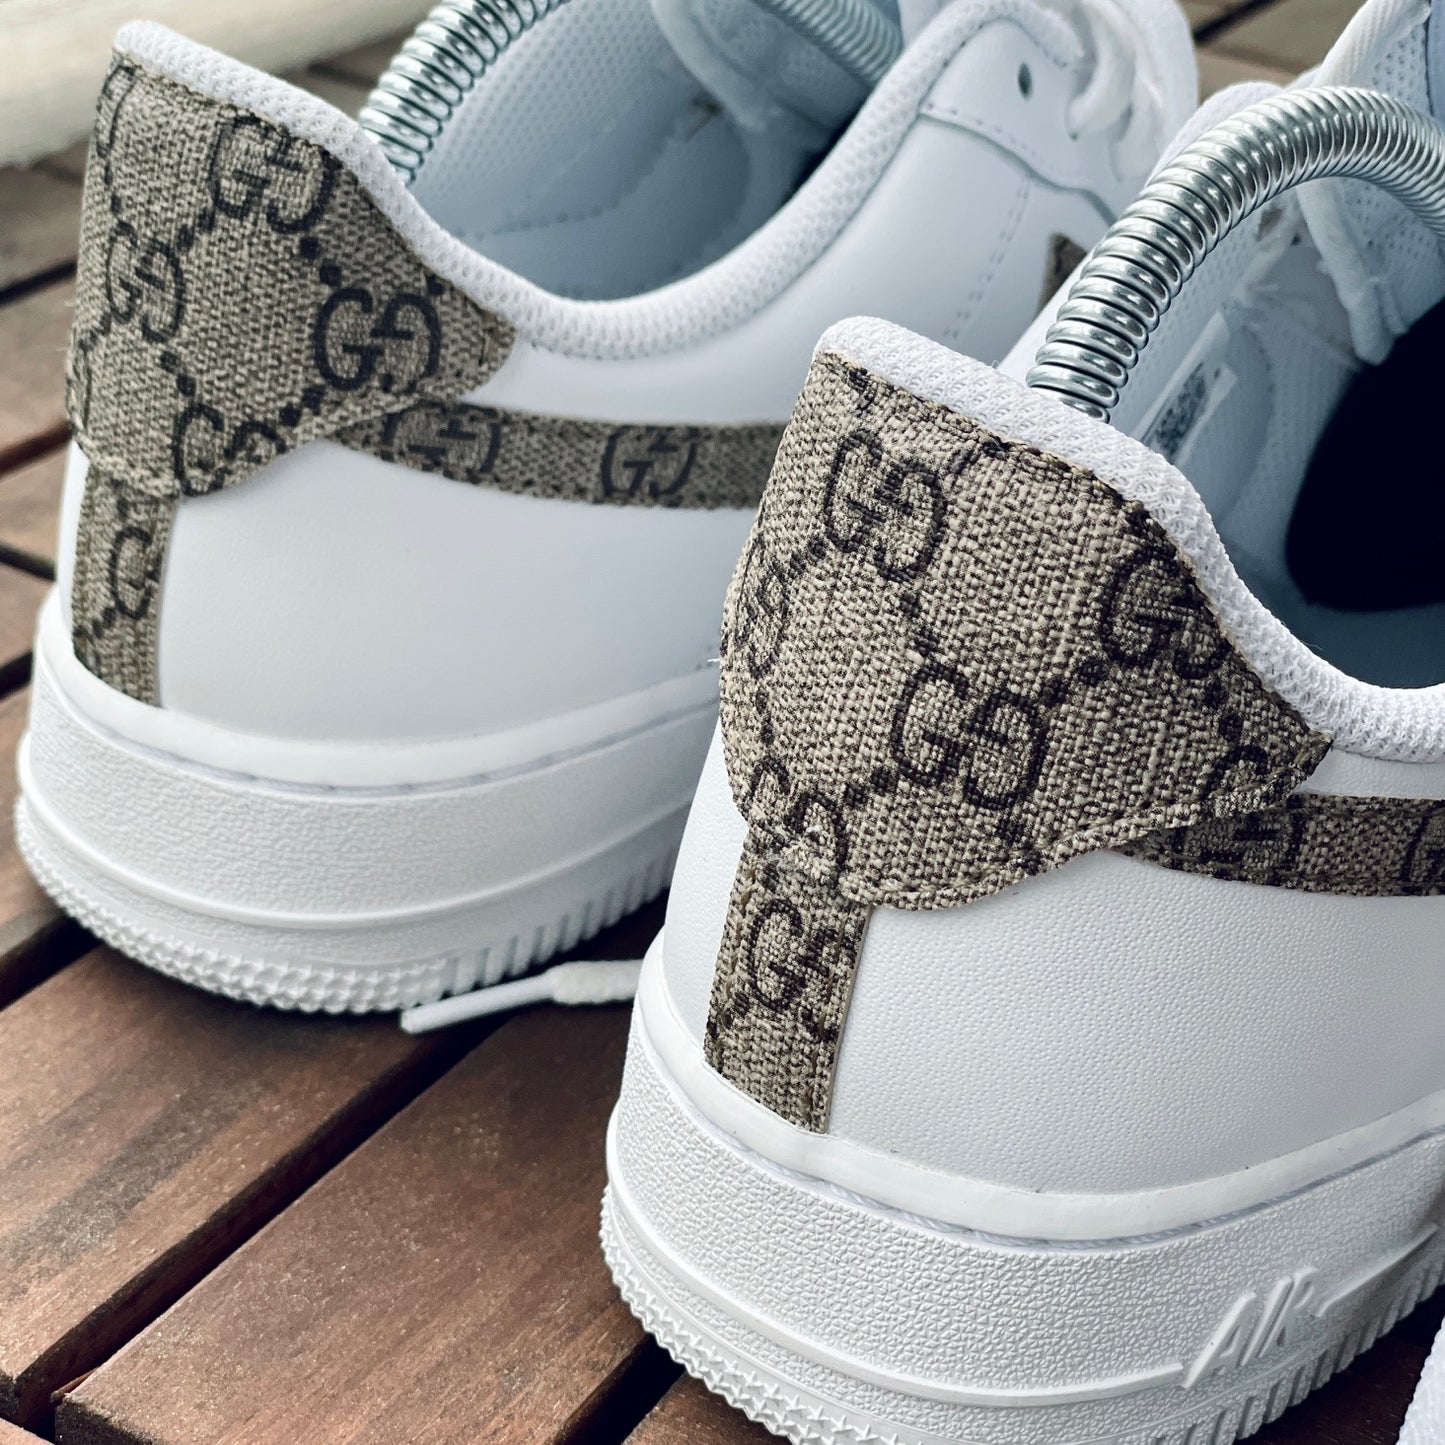 Nike Gucci AF1 Shoes Sneakers